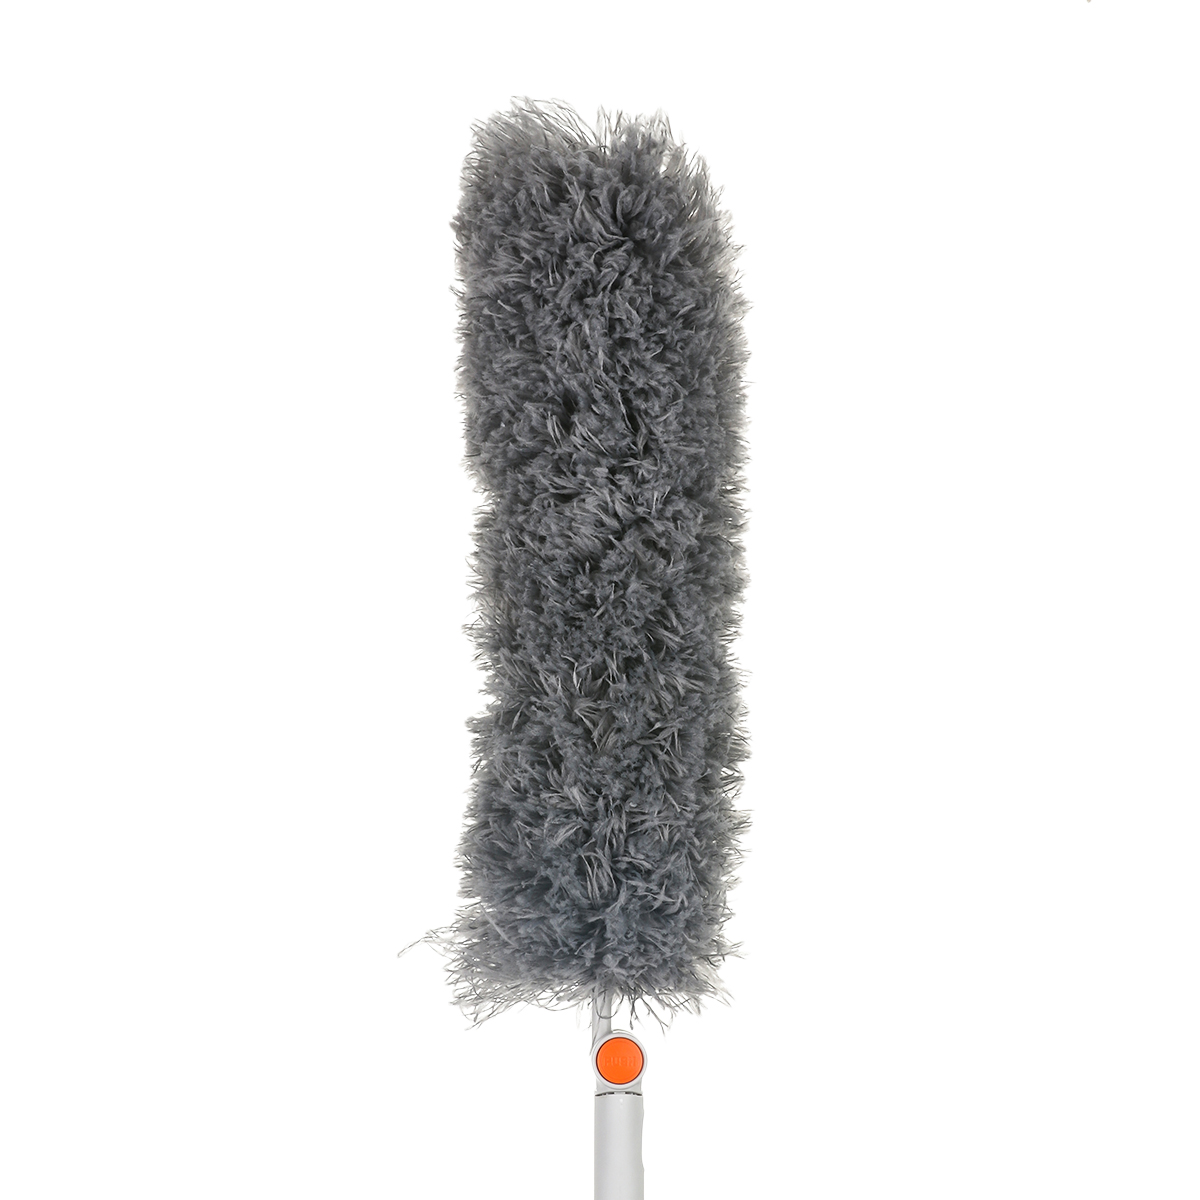 MATCC-Microfiber-Feather-Dusters-with-270deg-Rotation-Head-Extension-Pole-for-Cleaning-Tool-1878218-8